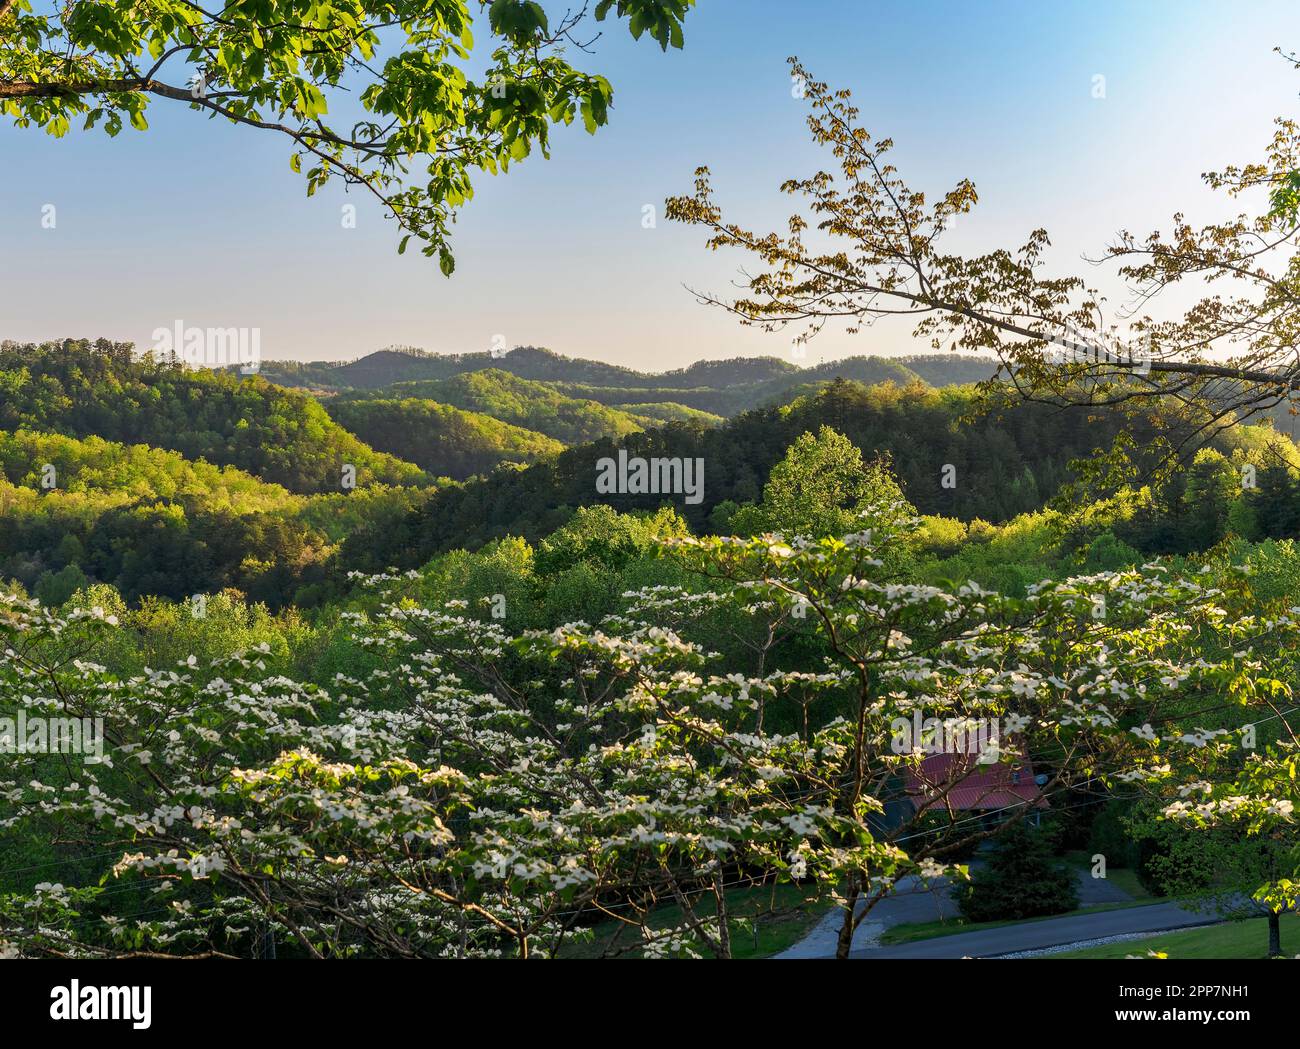 Flowering white dogwood tree with the Smokey Mountains in the background near Pigeon Forge Tennessee, USA. Stock Photo